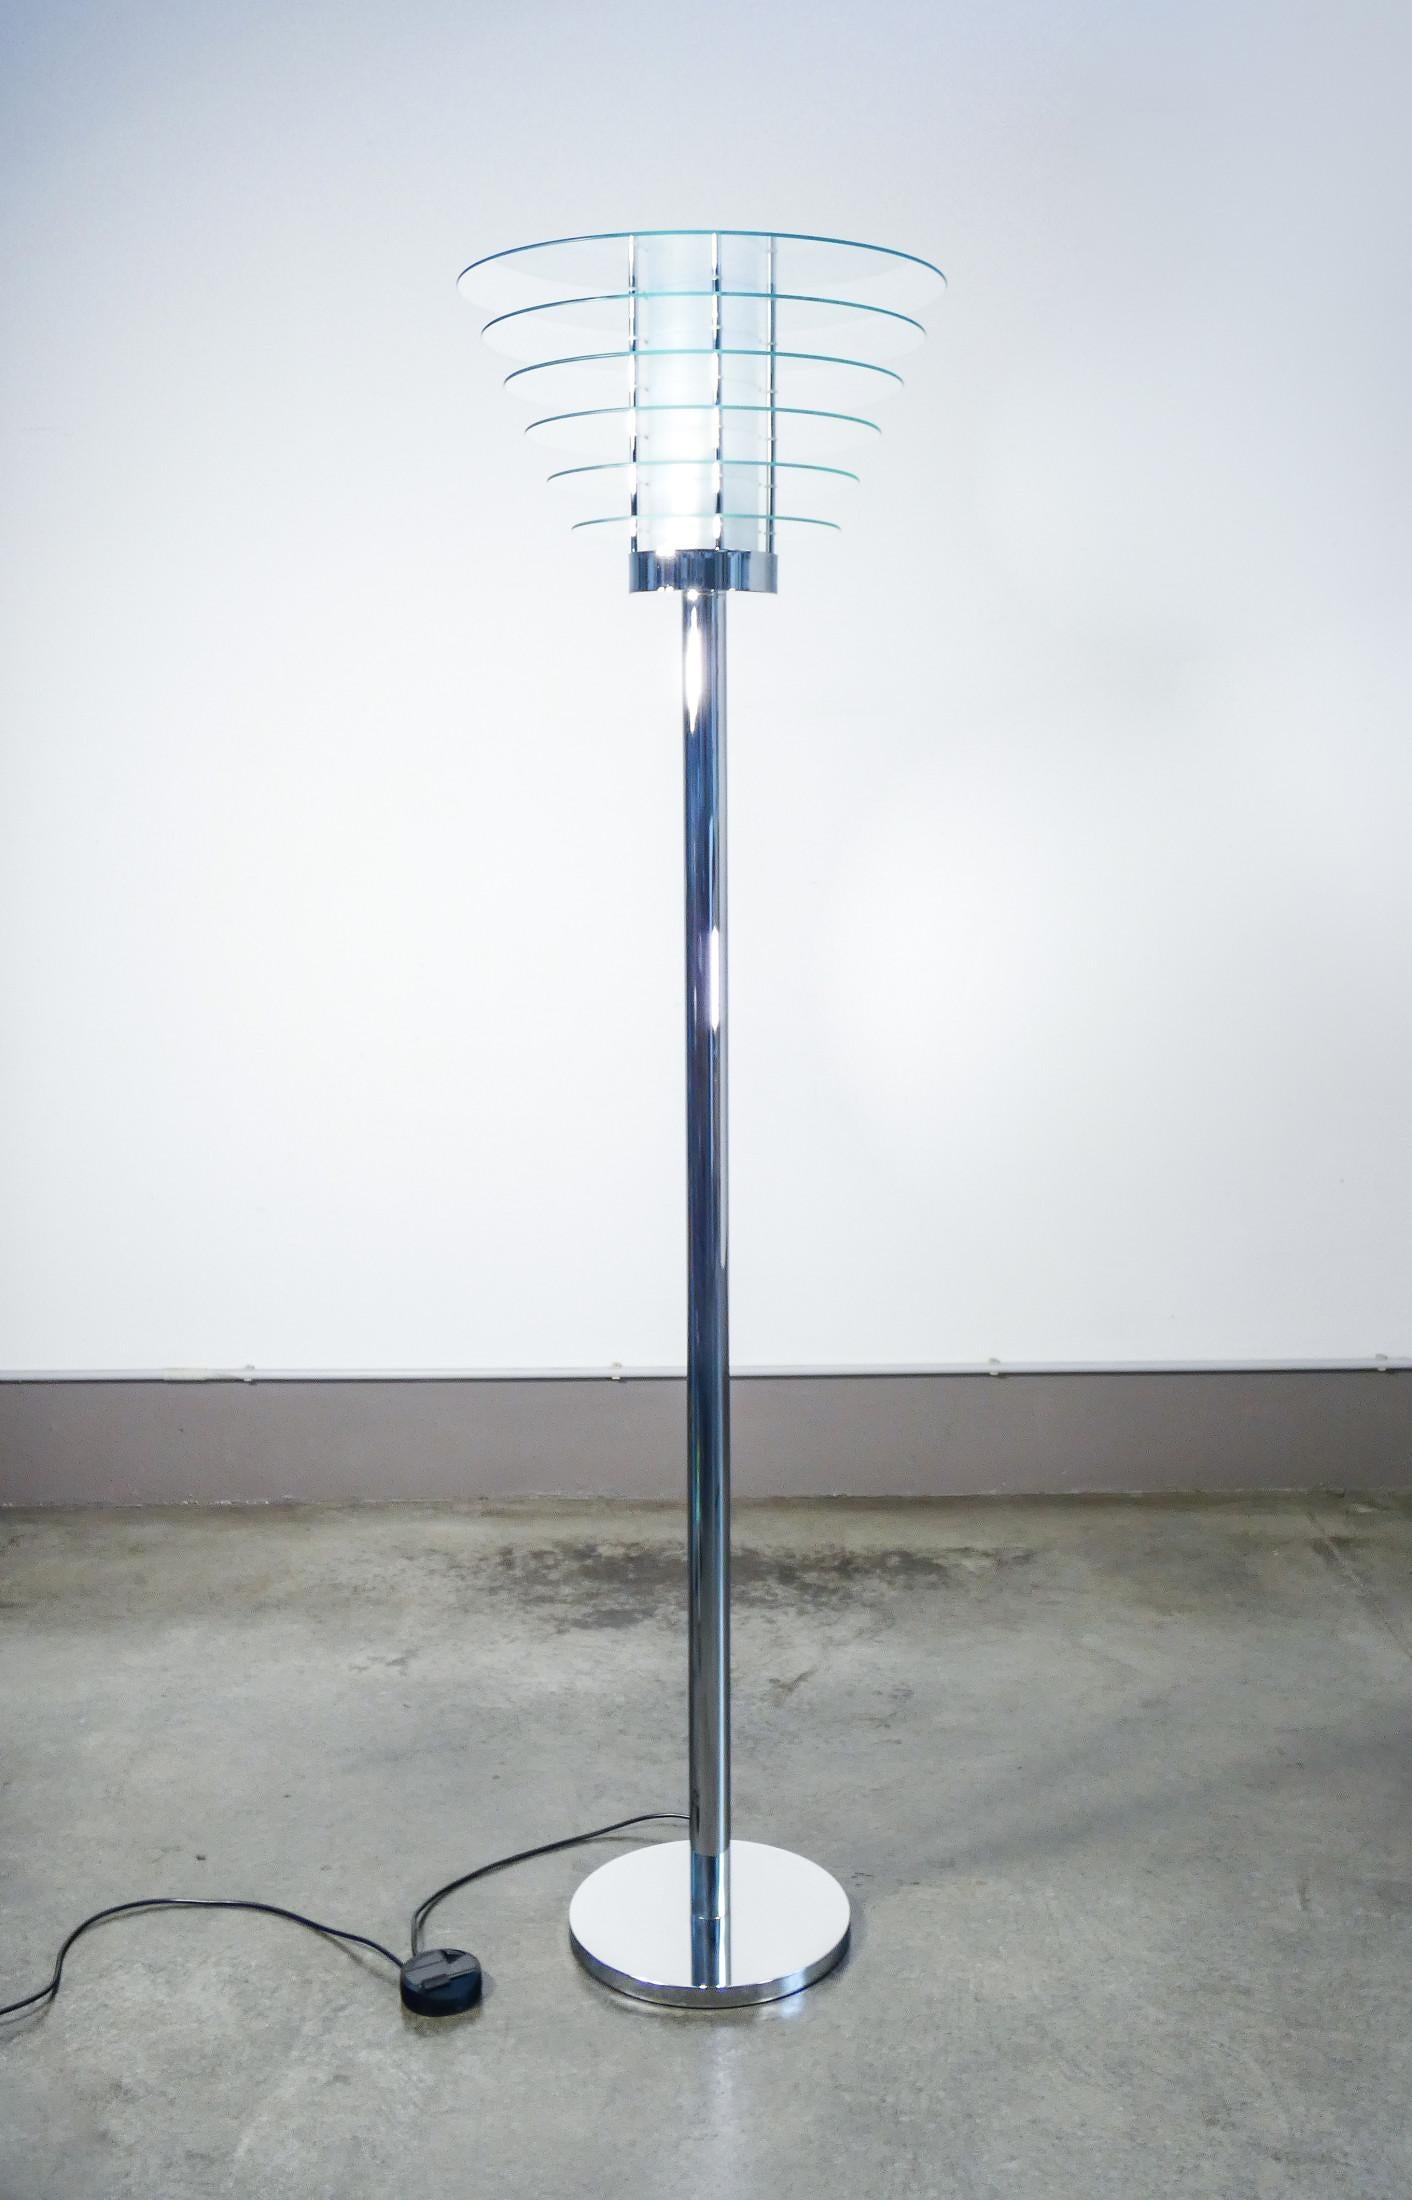 Floor lamp
mod. 0024 Large,
design by Giò PONTI
for FONTANA ARTE.
Dimmable diffused light
on the floor with
slide switch.

ORIGIN
Italy

DESIGNER
Gio PONTI
(1891-1979) was an influential Italian architect and designer, among the best known on the